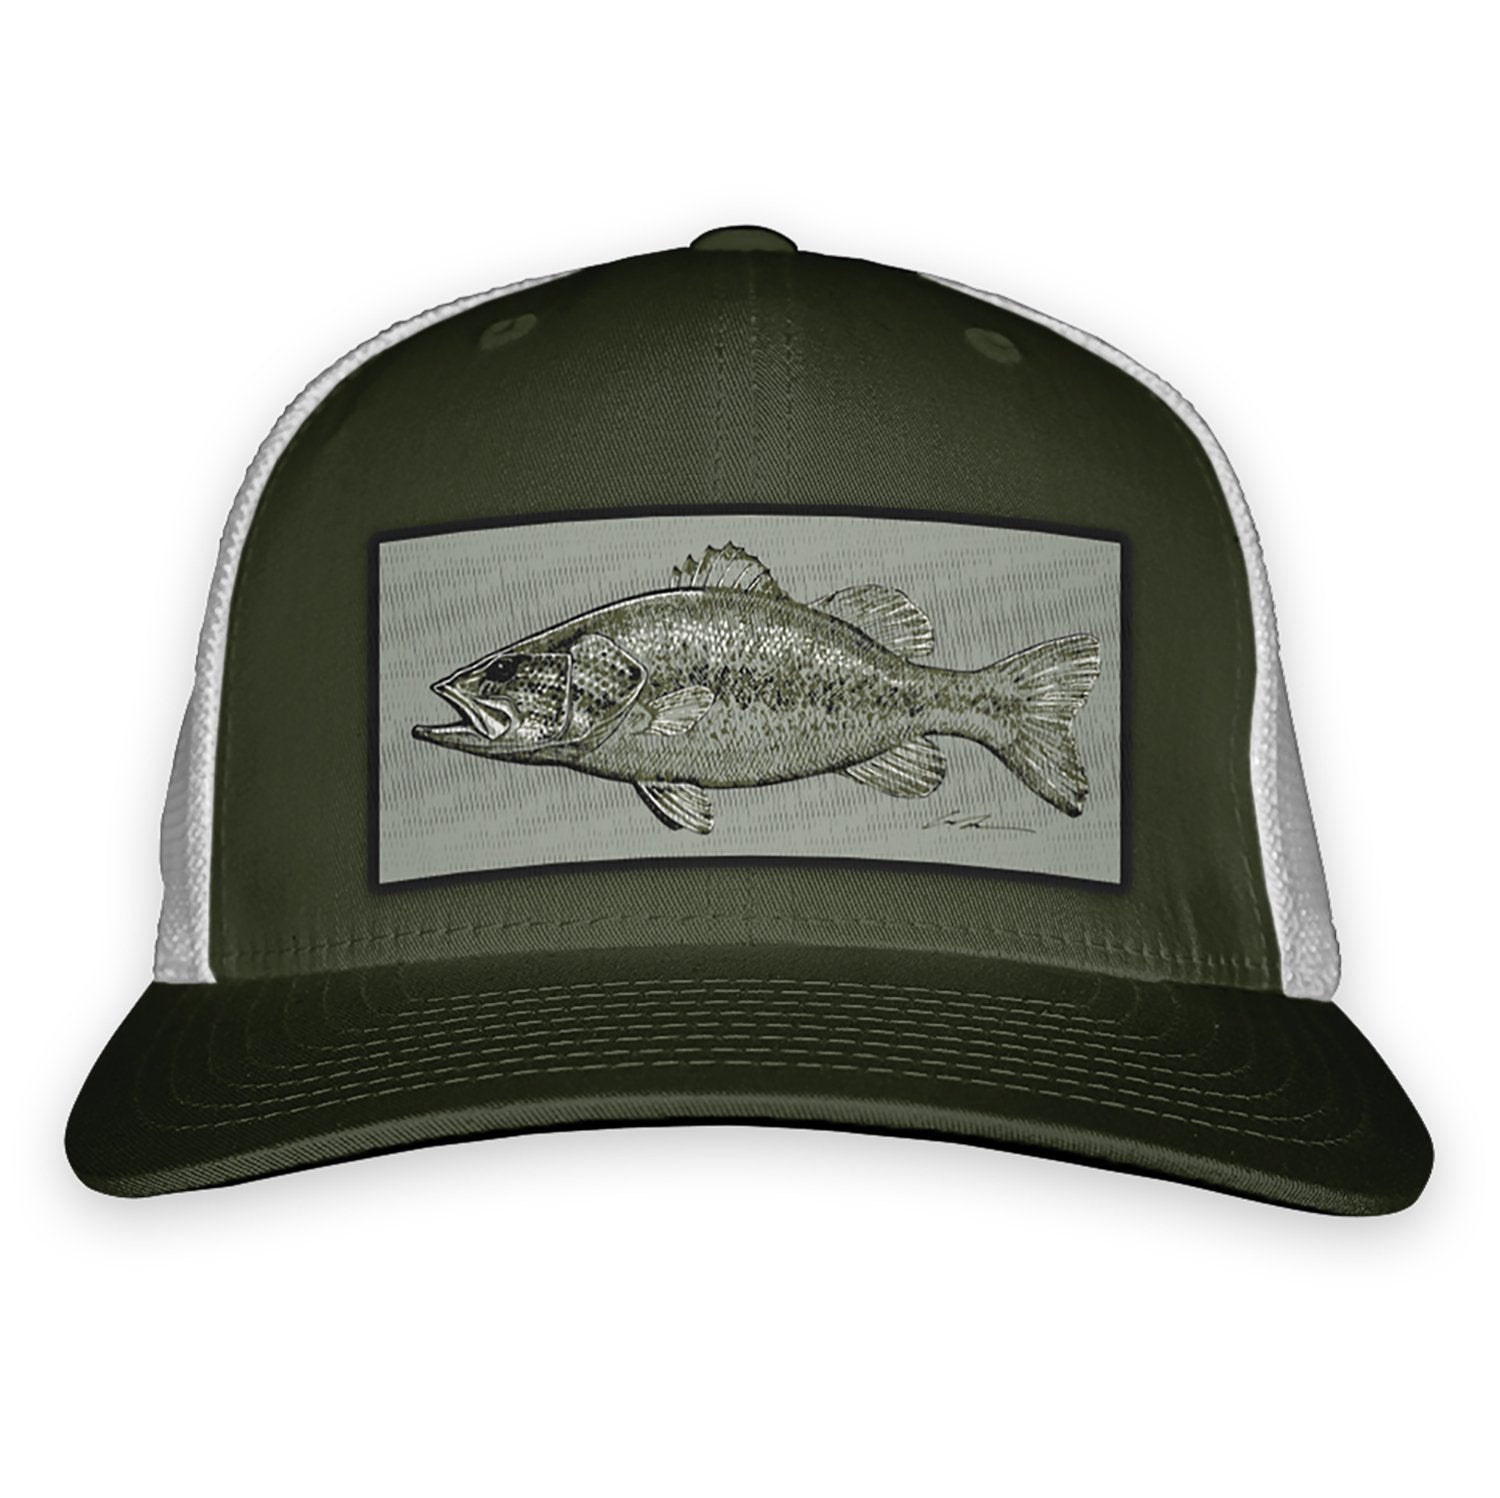 Rep Your Water - Motor City Anglers